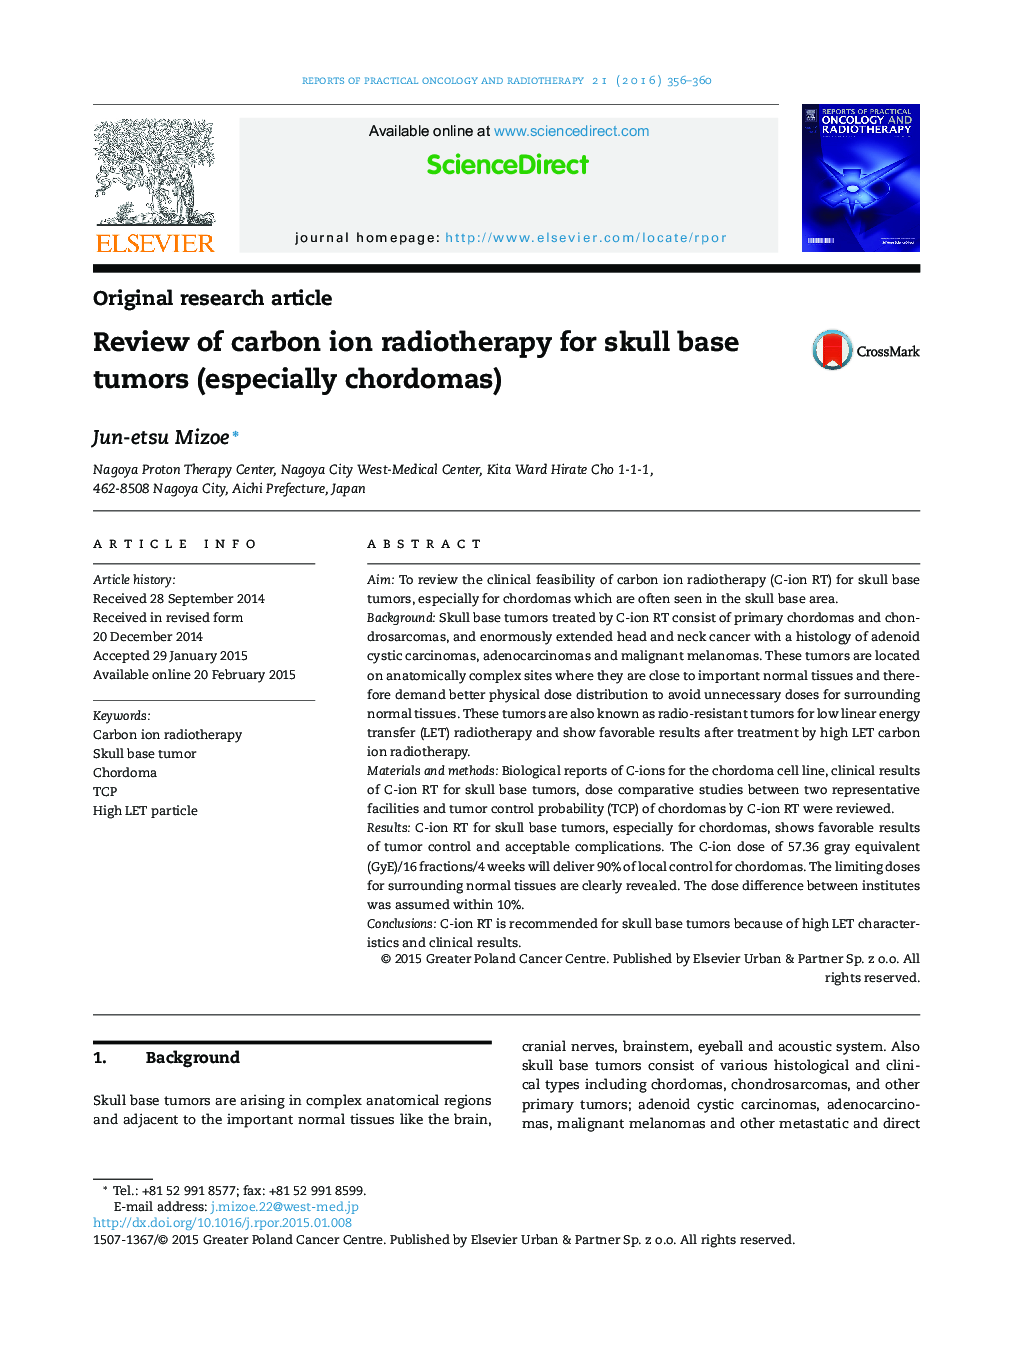 Review of carbon ion radiotherapy for skull base tumors (especially chordomas)